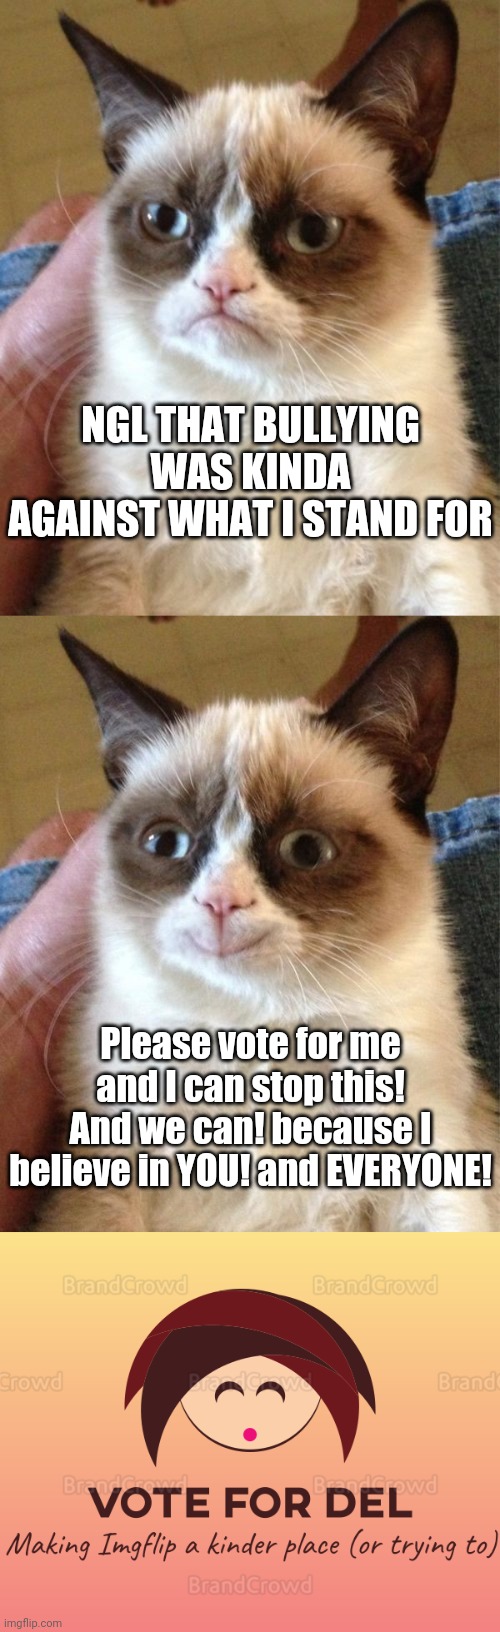 Plez spread the cause | NGL THAT BULLYING WAS KINDA AGAINST WHAT I STAND FOR; Please vote for me and I can stop this! And we can! because I believe in YOU! and EVERYONE! | image tagged in memes,grumpy cat,grumpy cat happy,vote for del | made w/ Imgflip meme maker